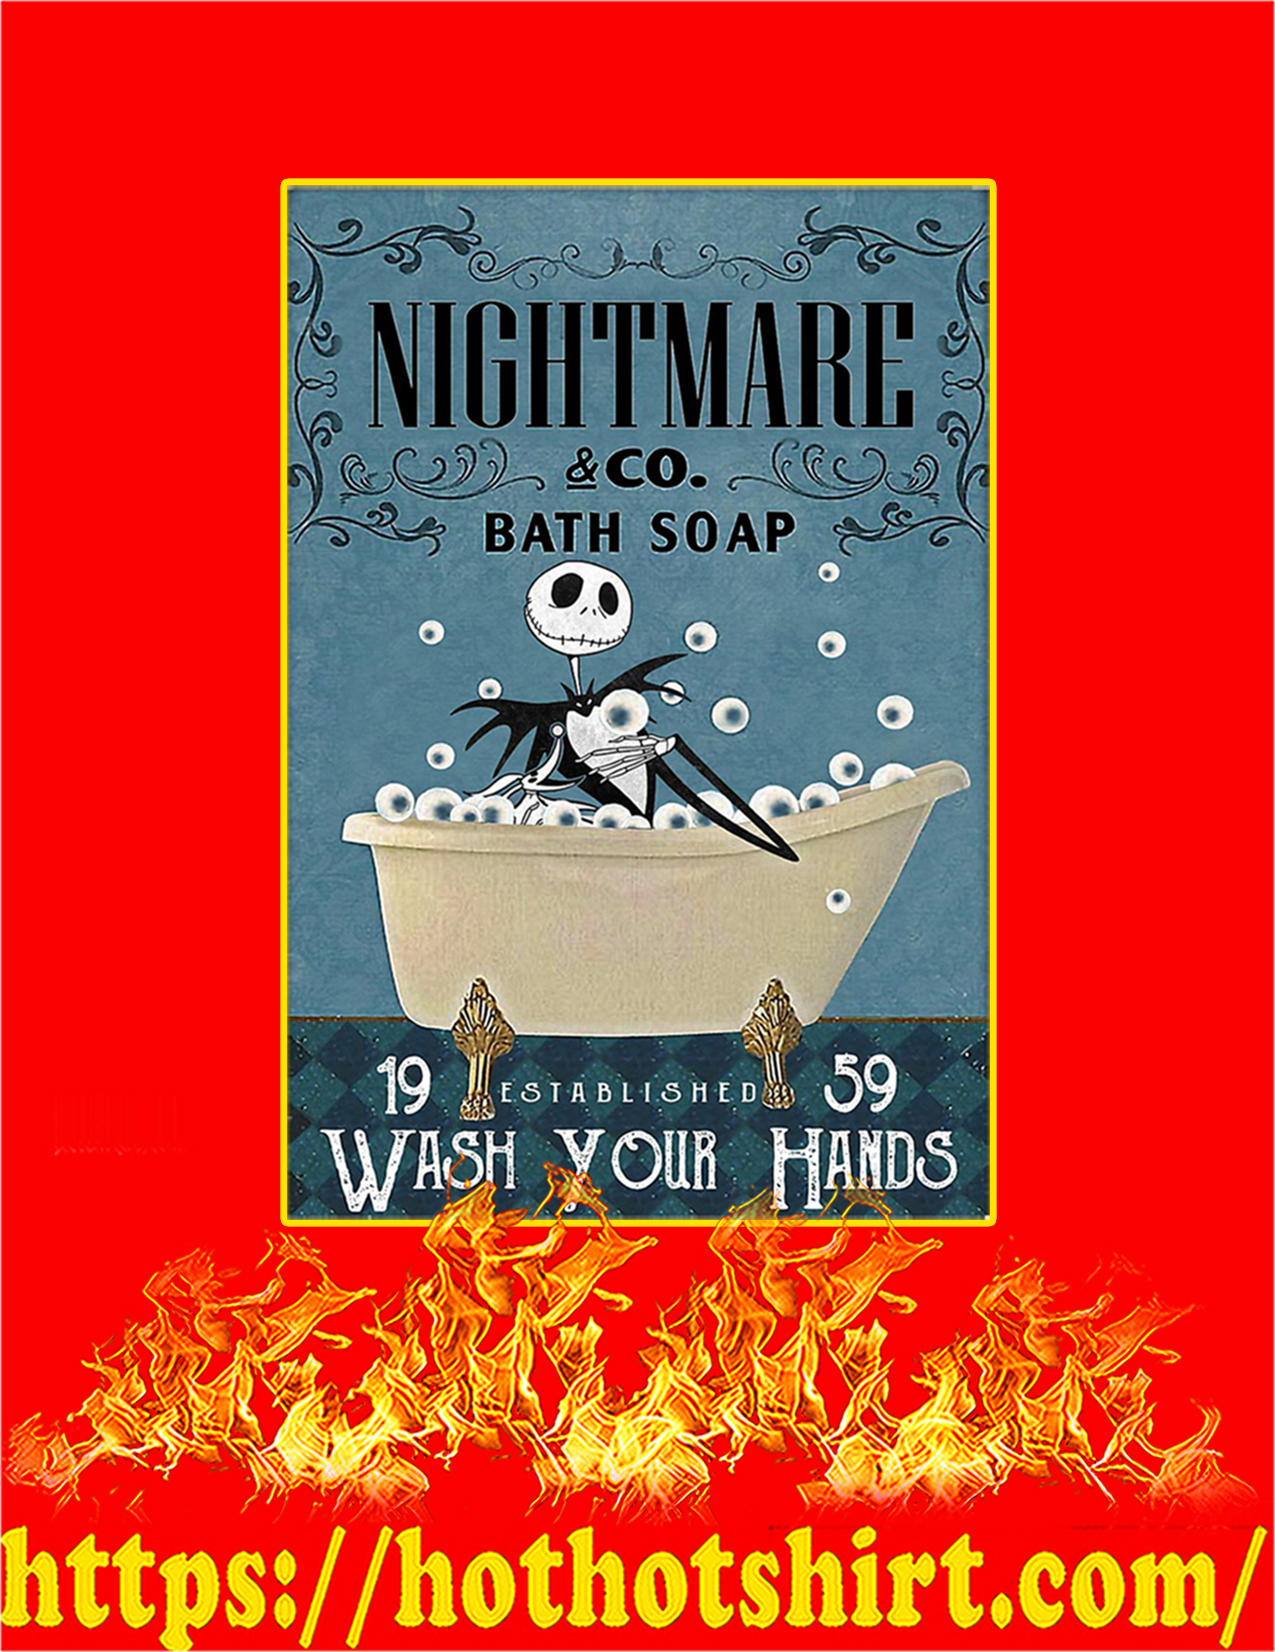 Bath soap company nightmare wash your hands poster